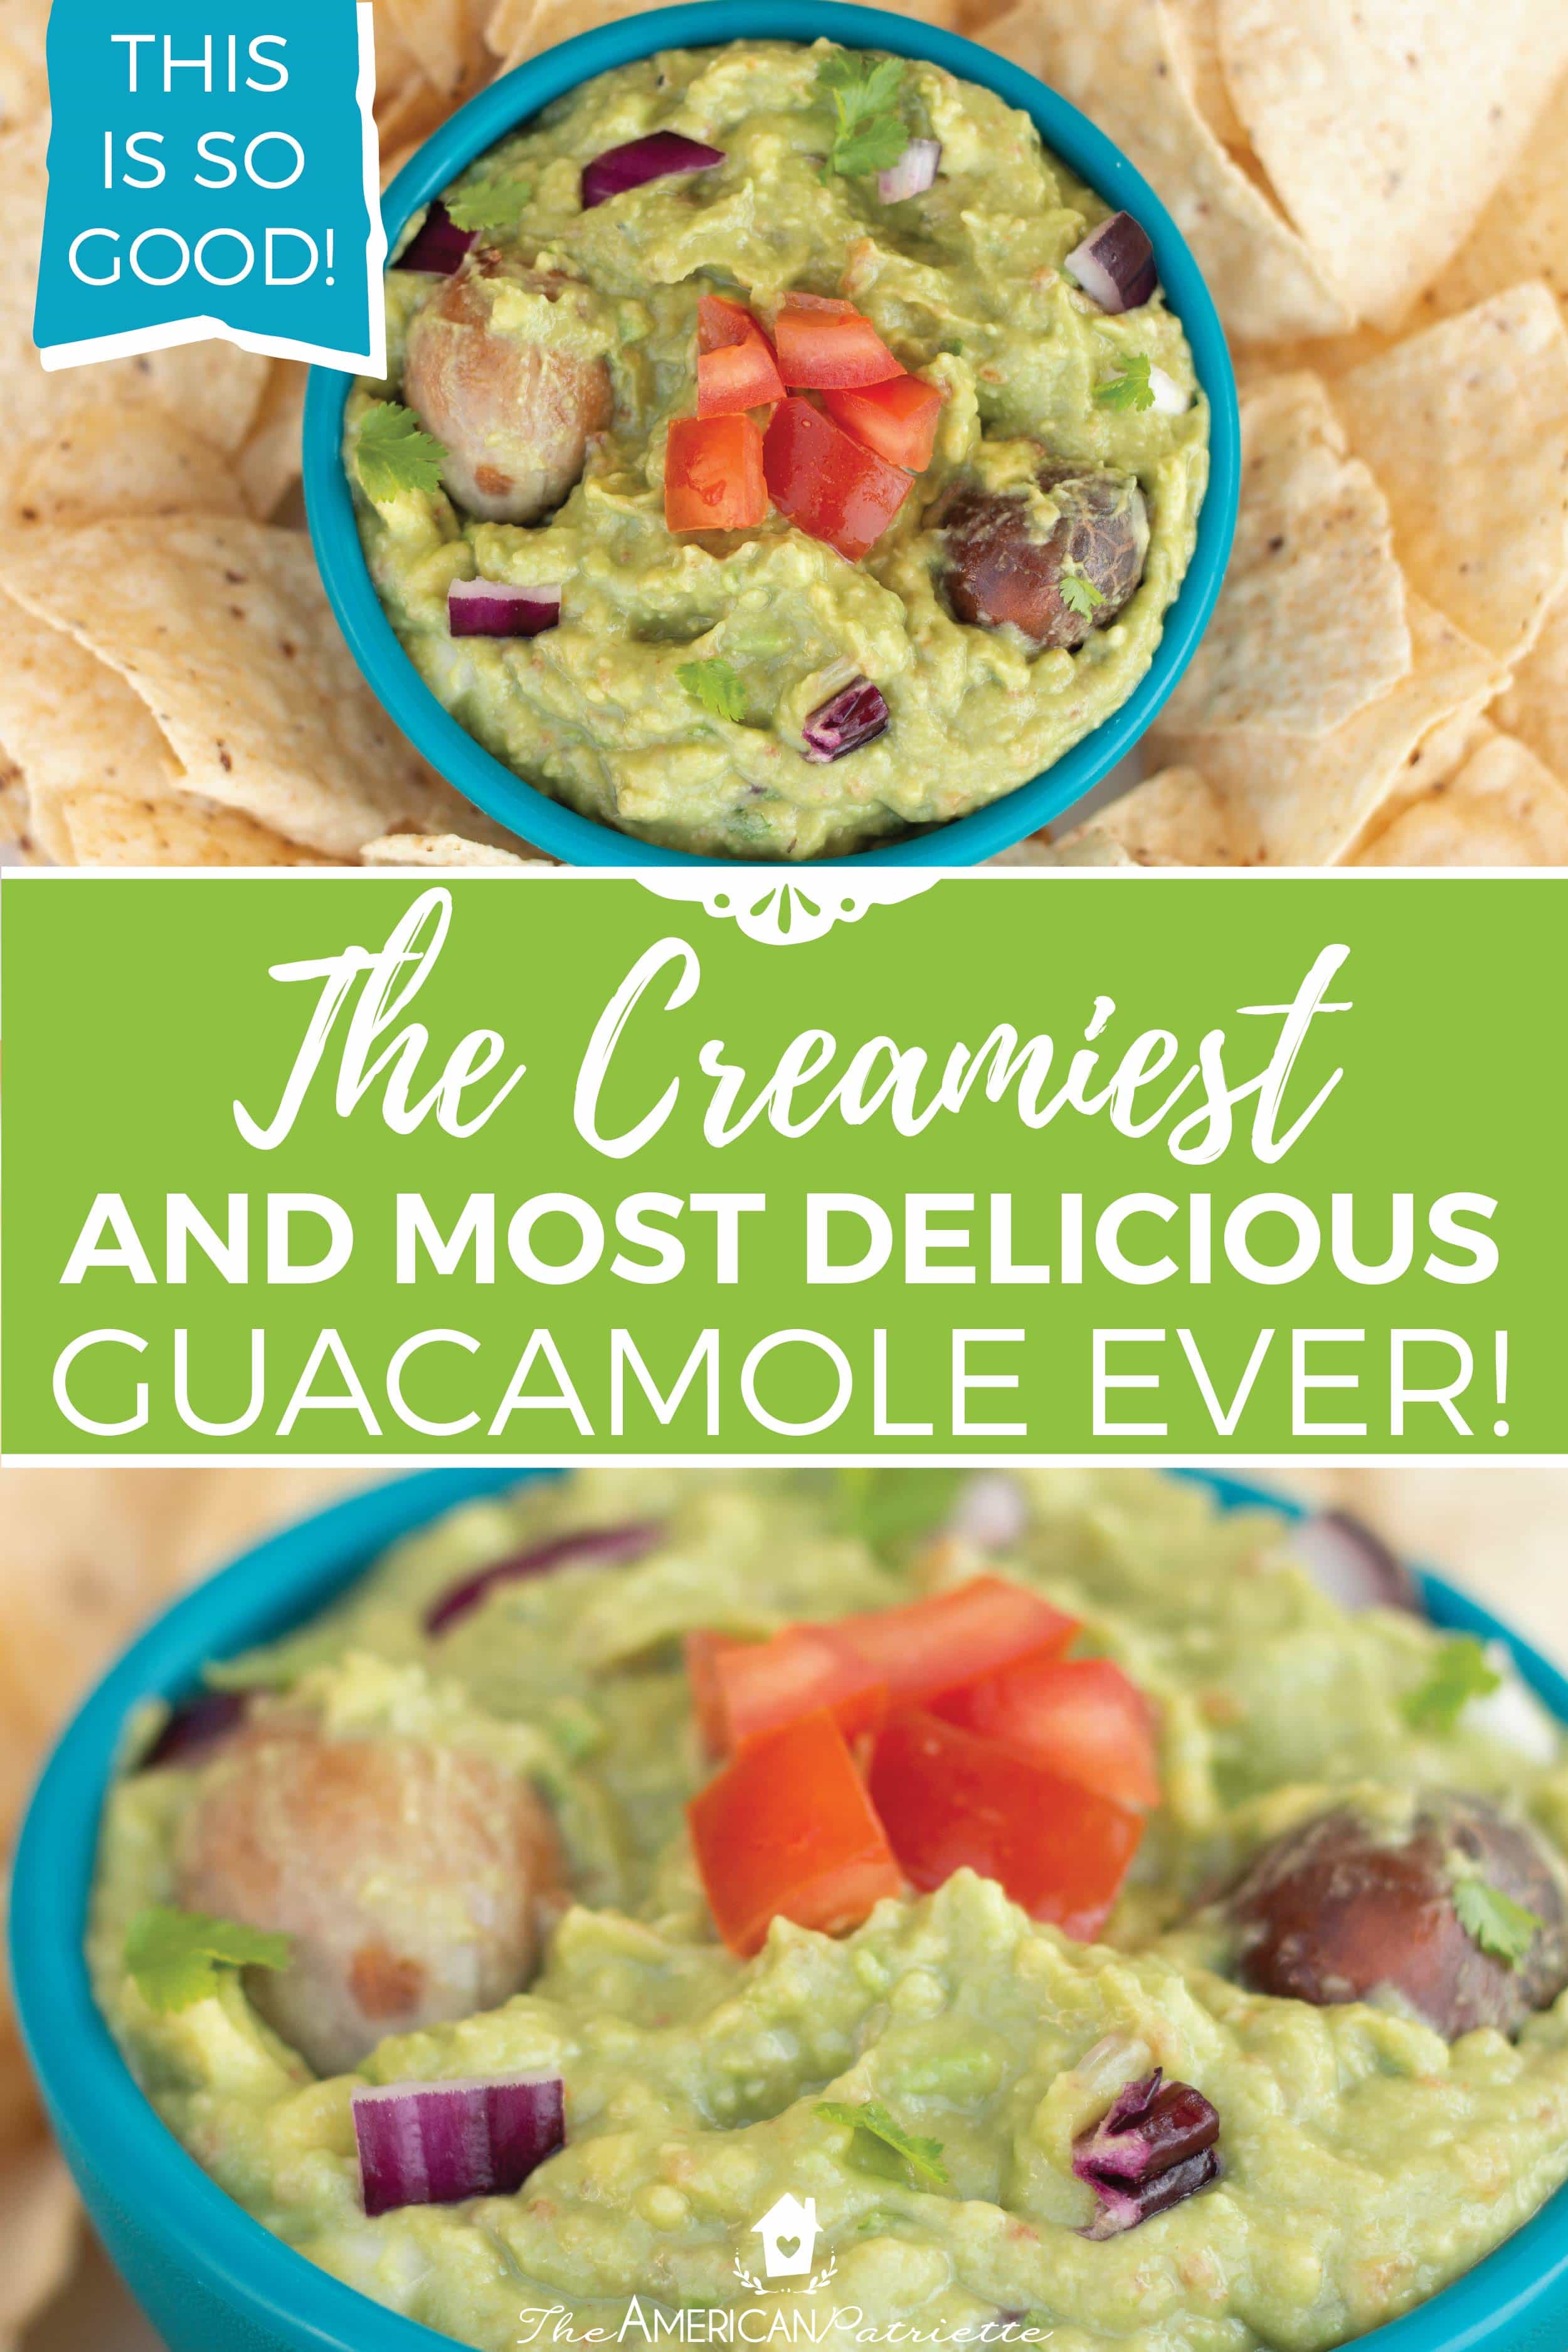 The absolute best guacamole recipe ever! Look no further for a recipe for the creamiest and tastiest guacamole in the world! Super easy to make and absolutely delicious! #guacamole #avocados #texmex